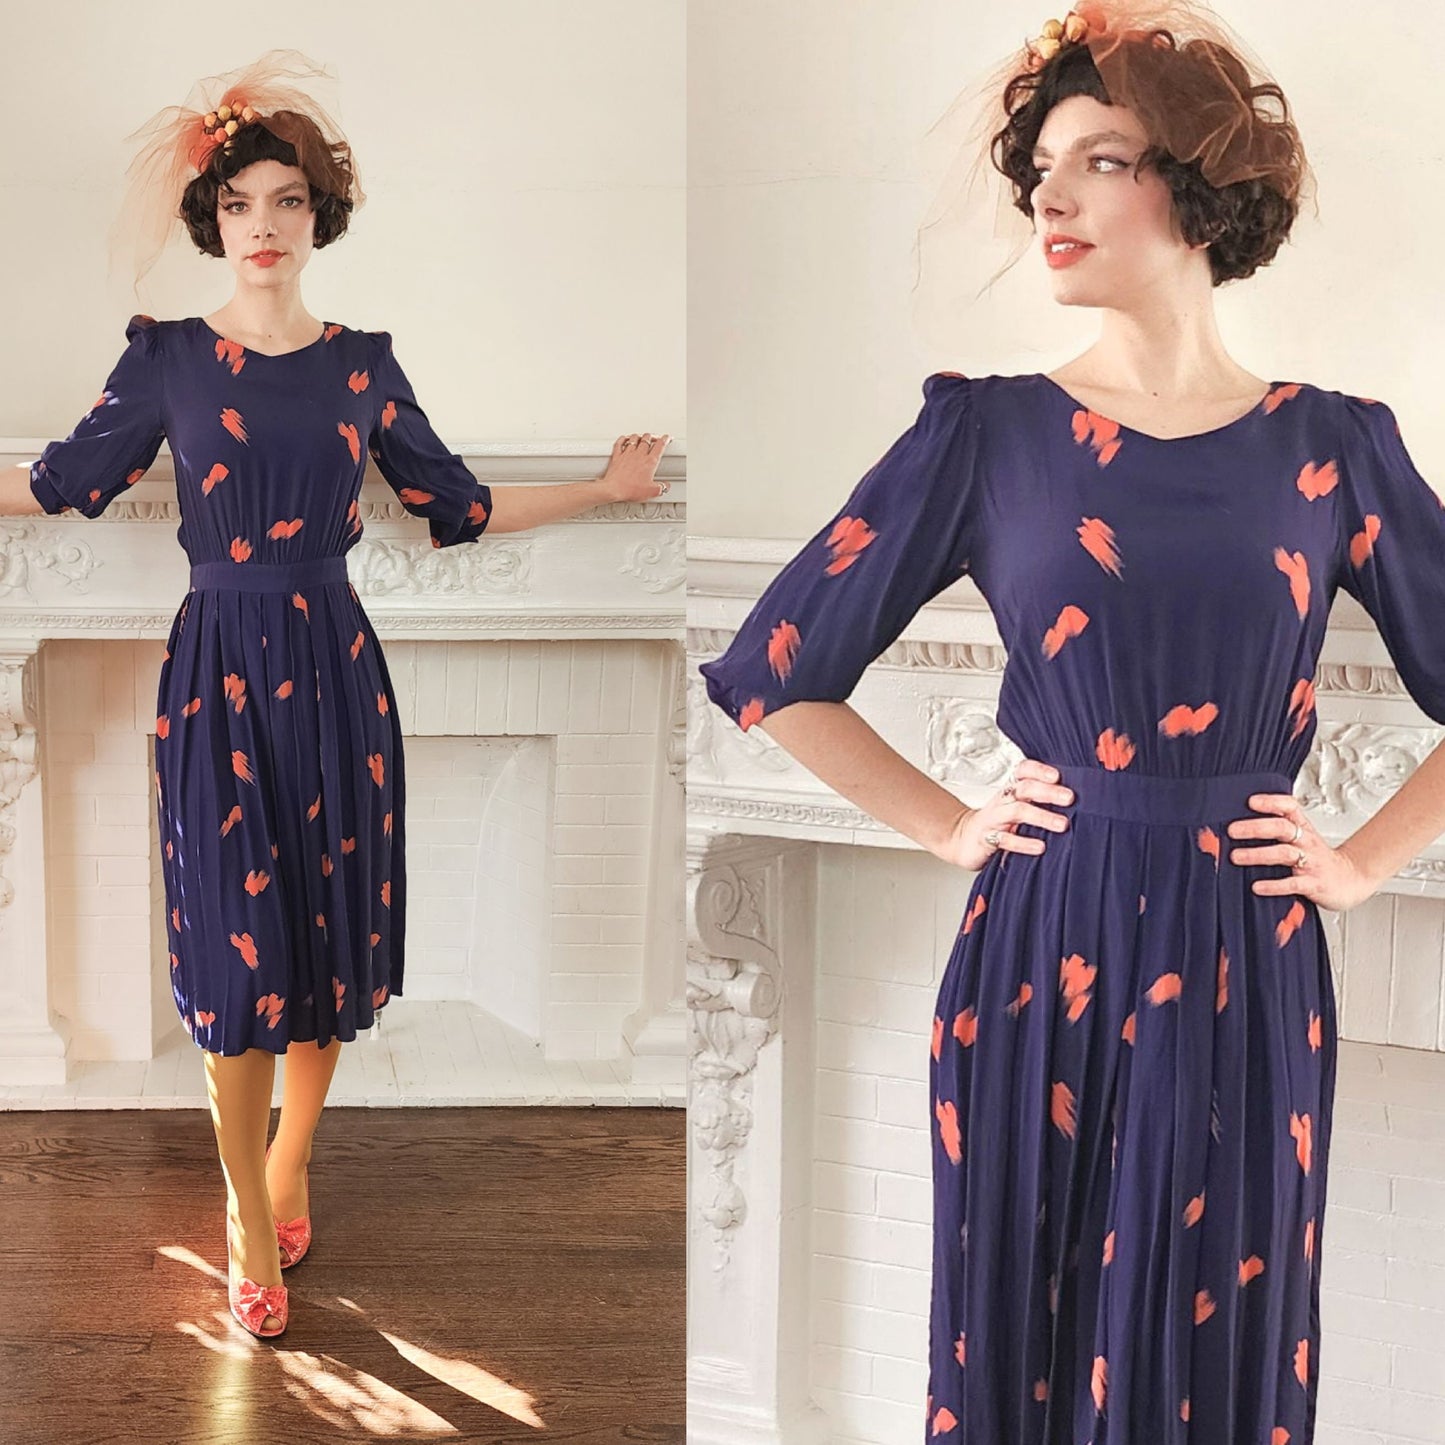 80s Does 40s Rayon Print Dress in Navy Blue and Coral Orange / S